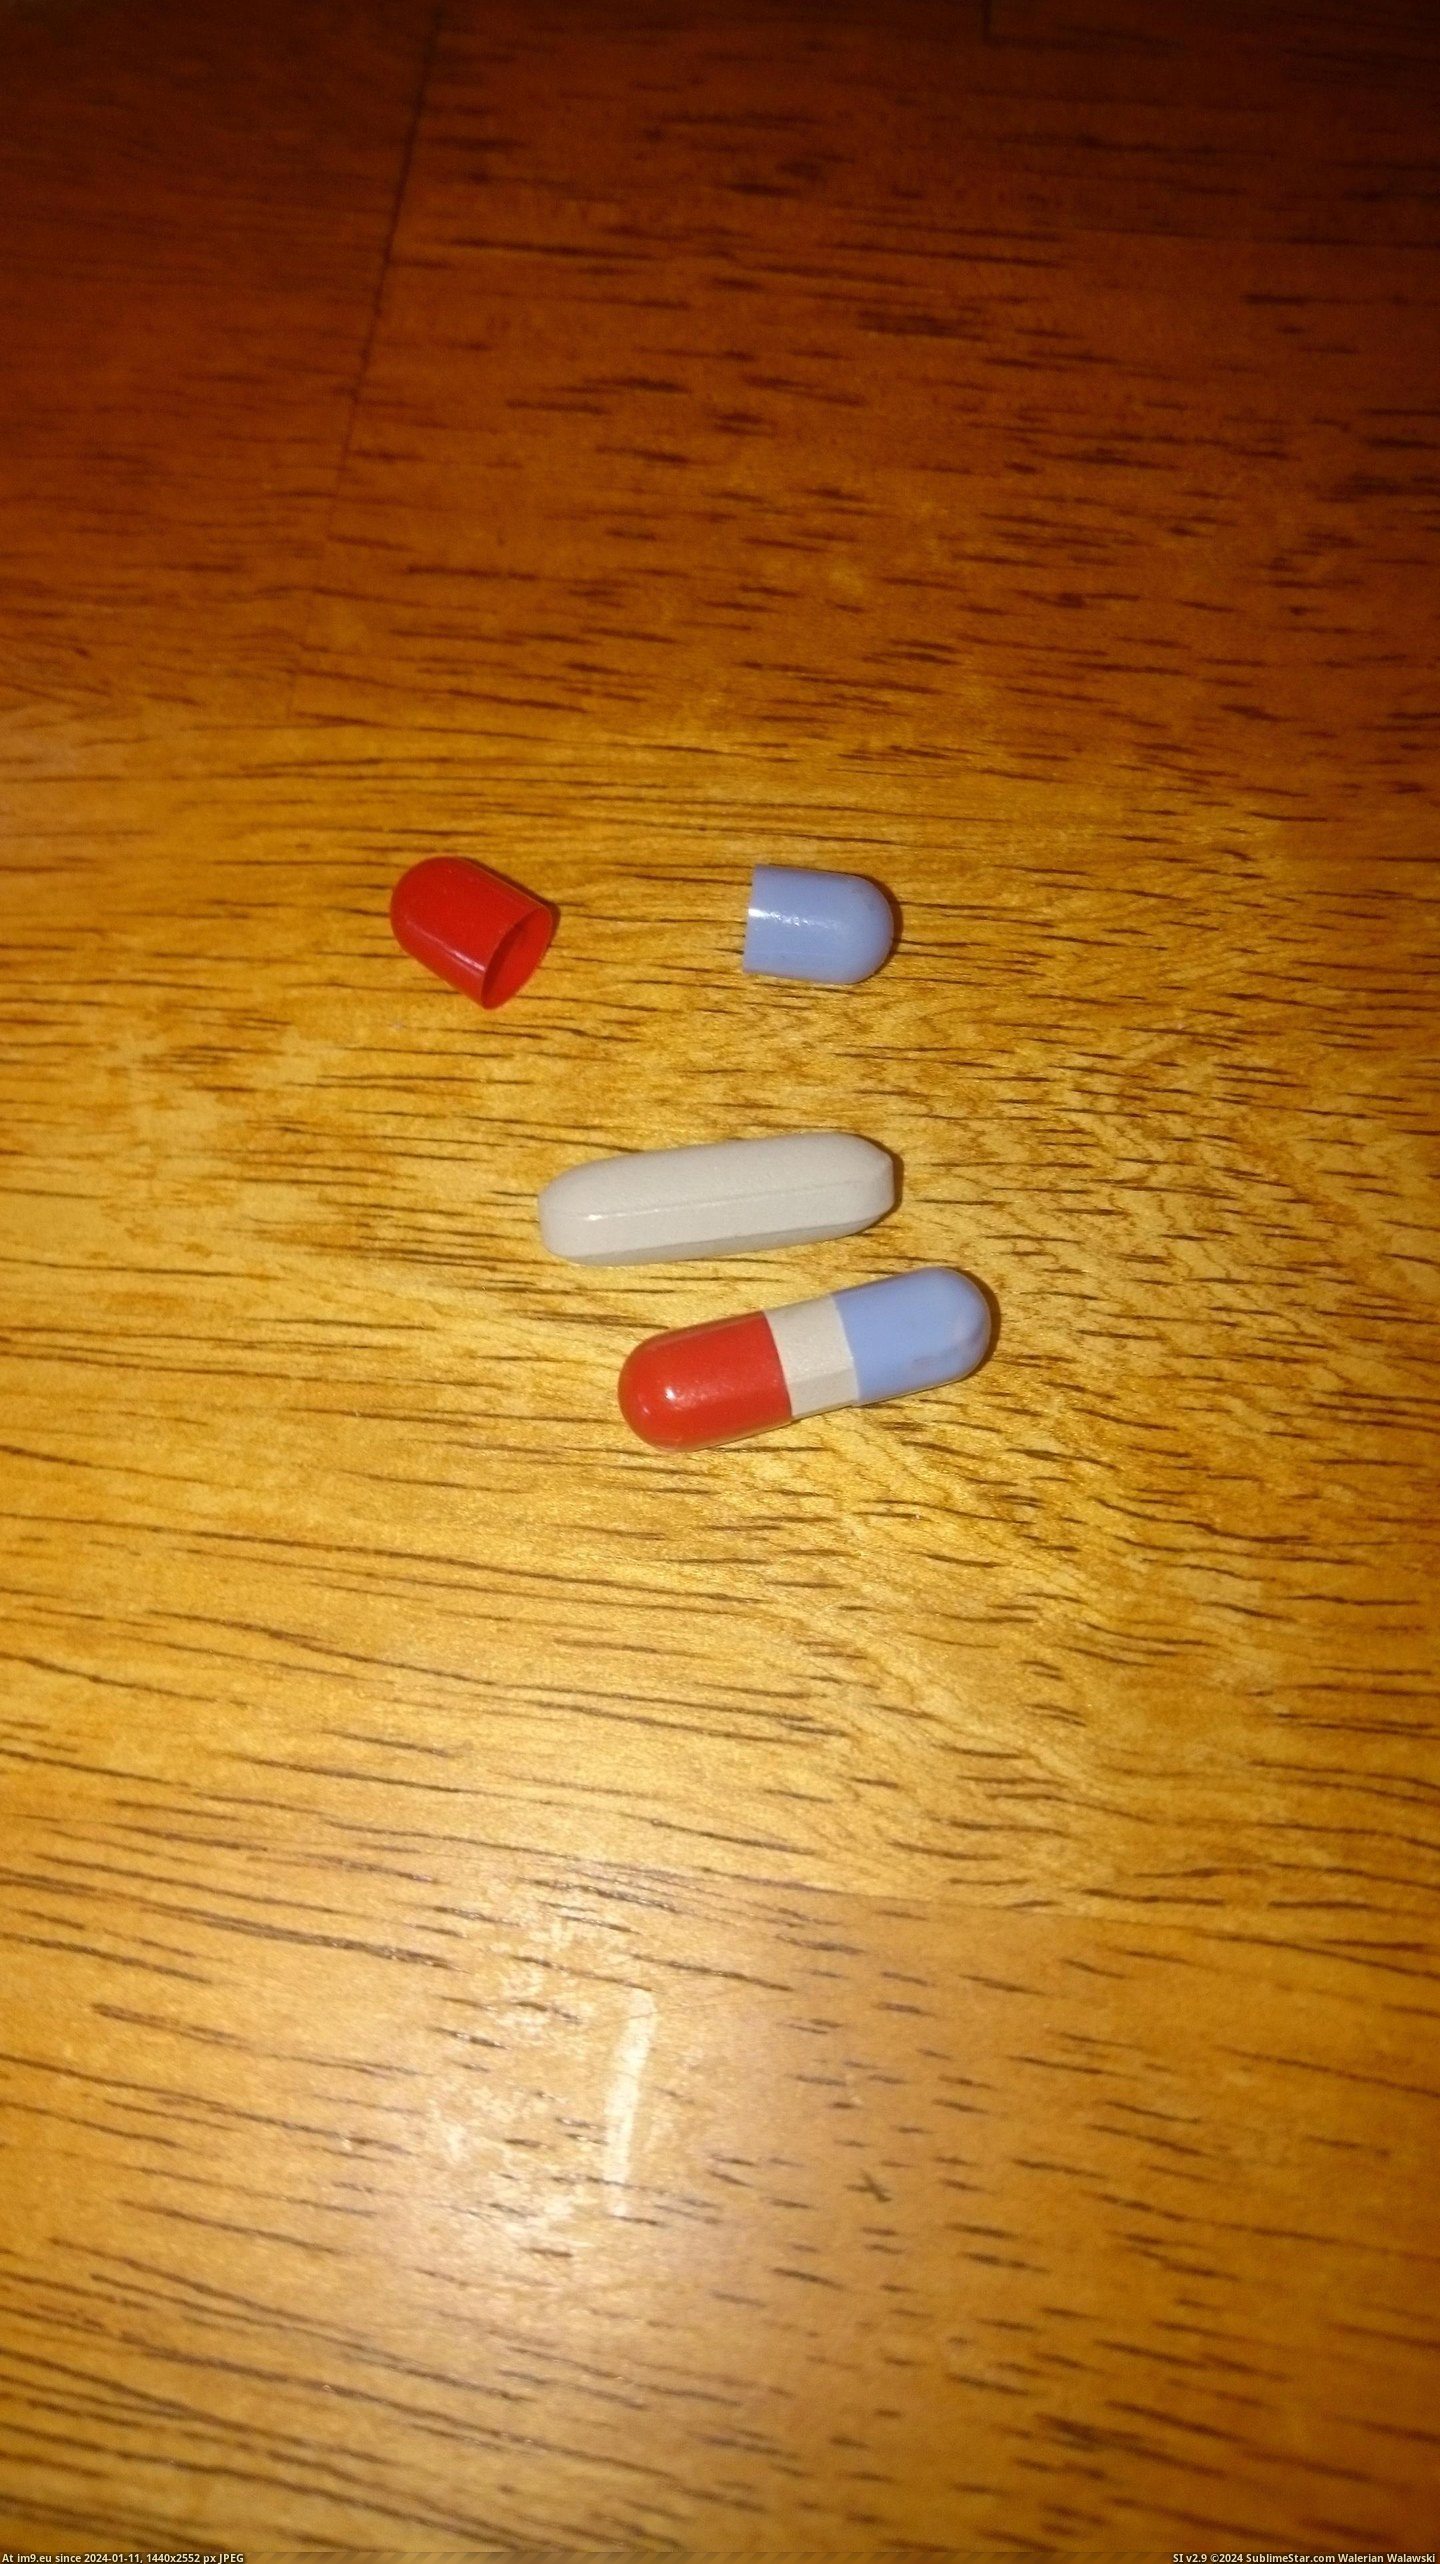 [Mildlyinteresting] My tylenol capsules are just normal pills with little caps on both ends (in My r/MILDLYINTERESTING favs)